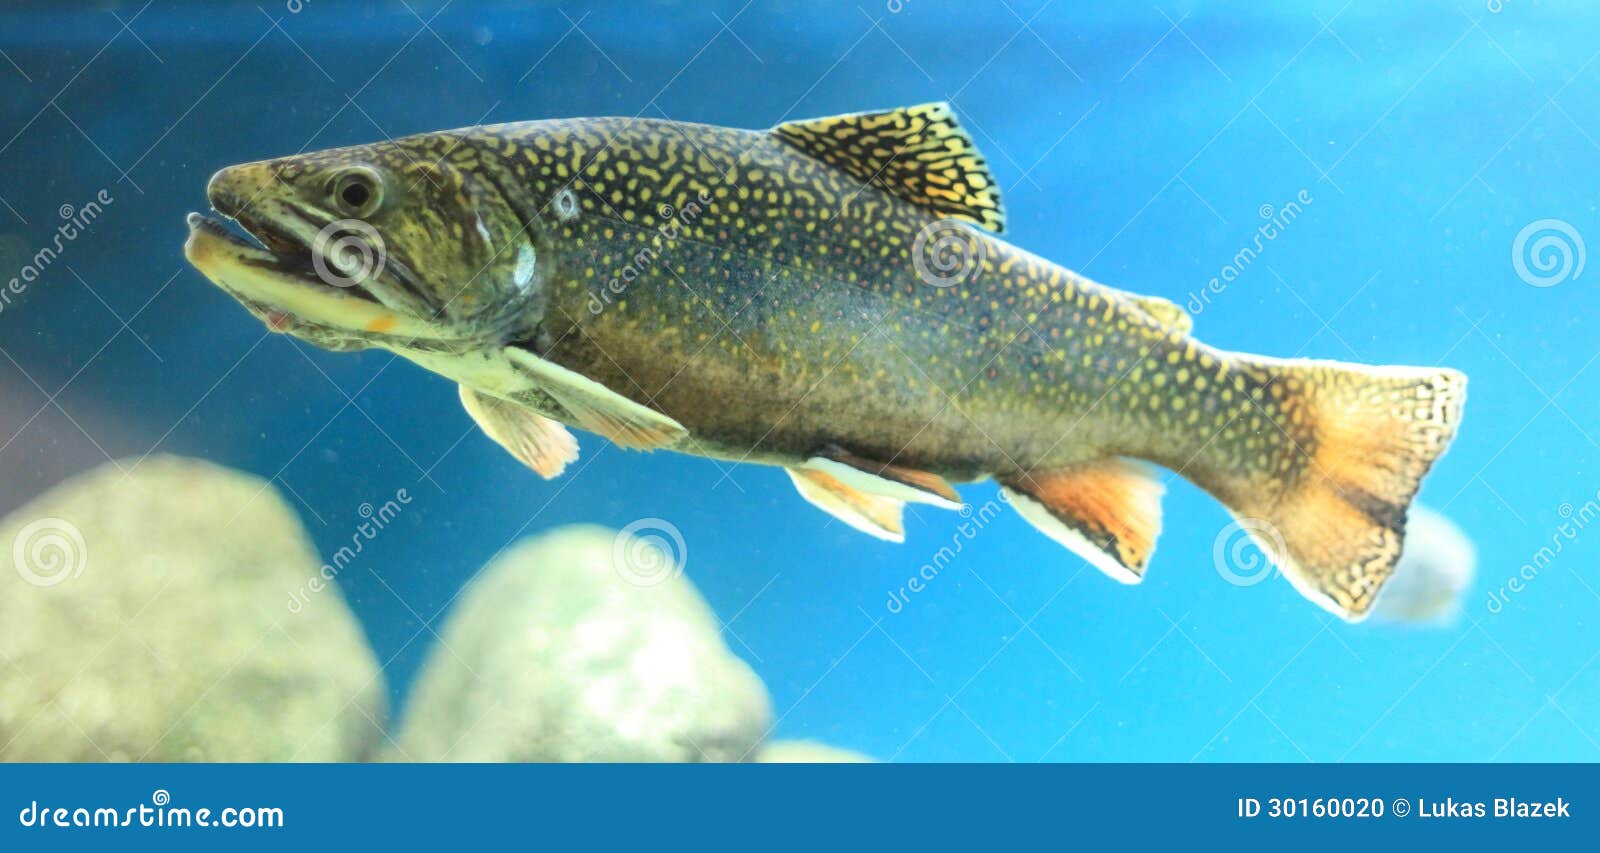 eastern brook trout